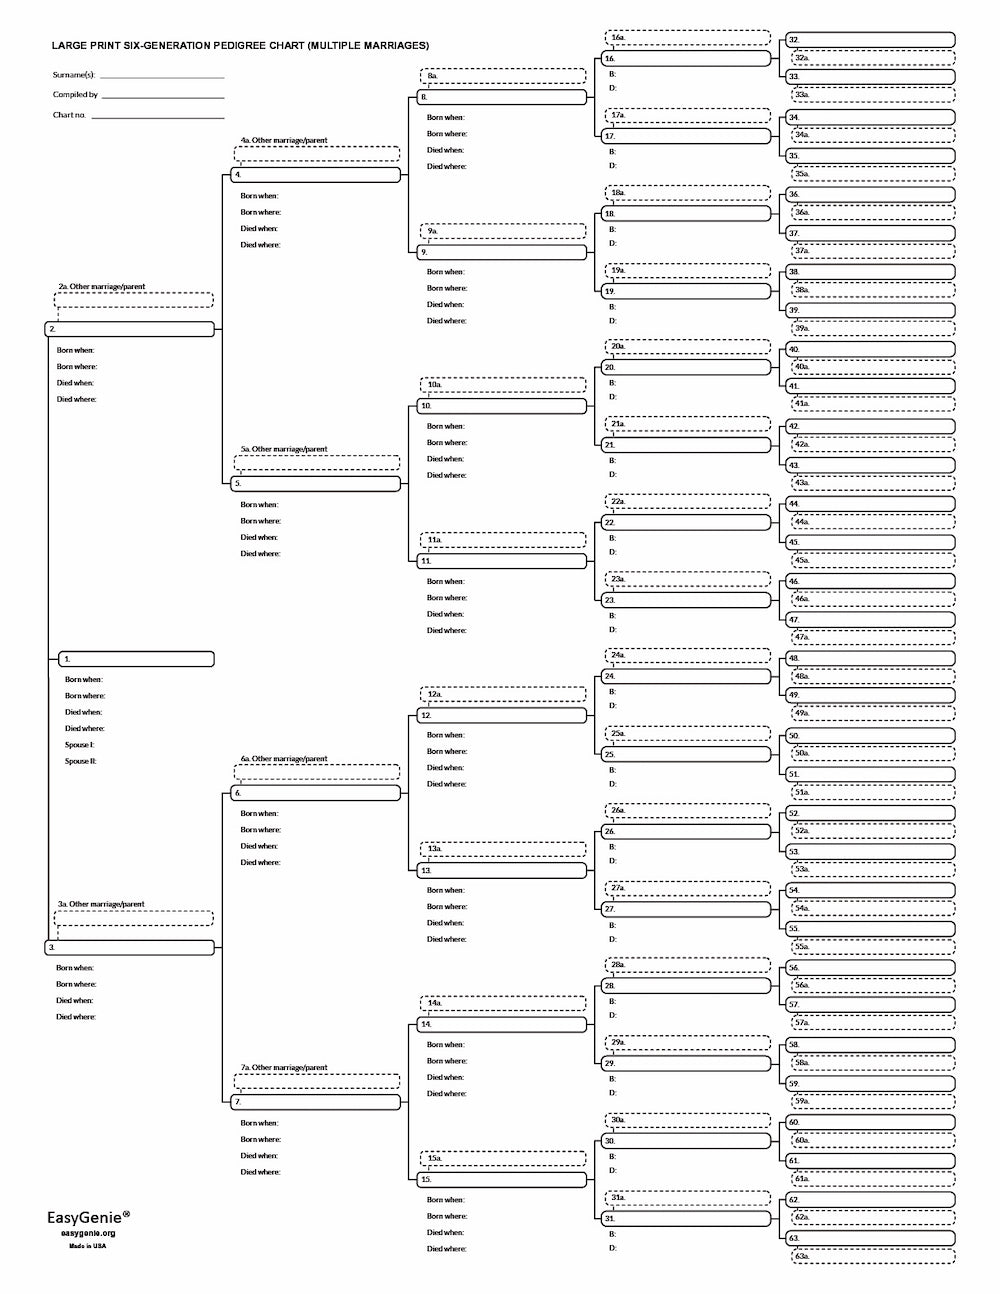 Large Print 6 Generation Pedigree Chart with Multiple Spouses (17 x 22 Inches, Single Sheet)